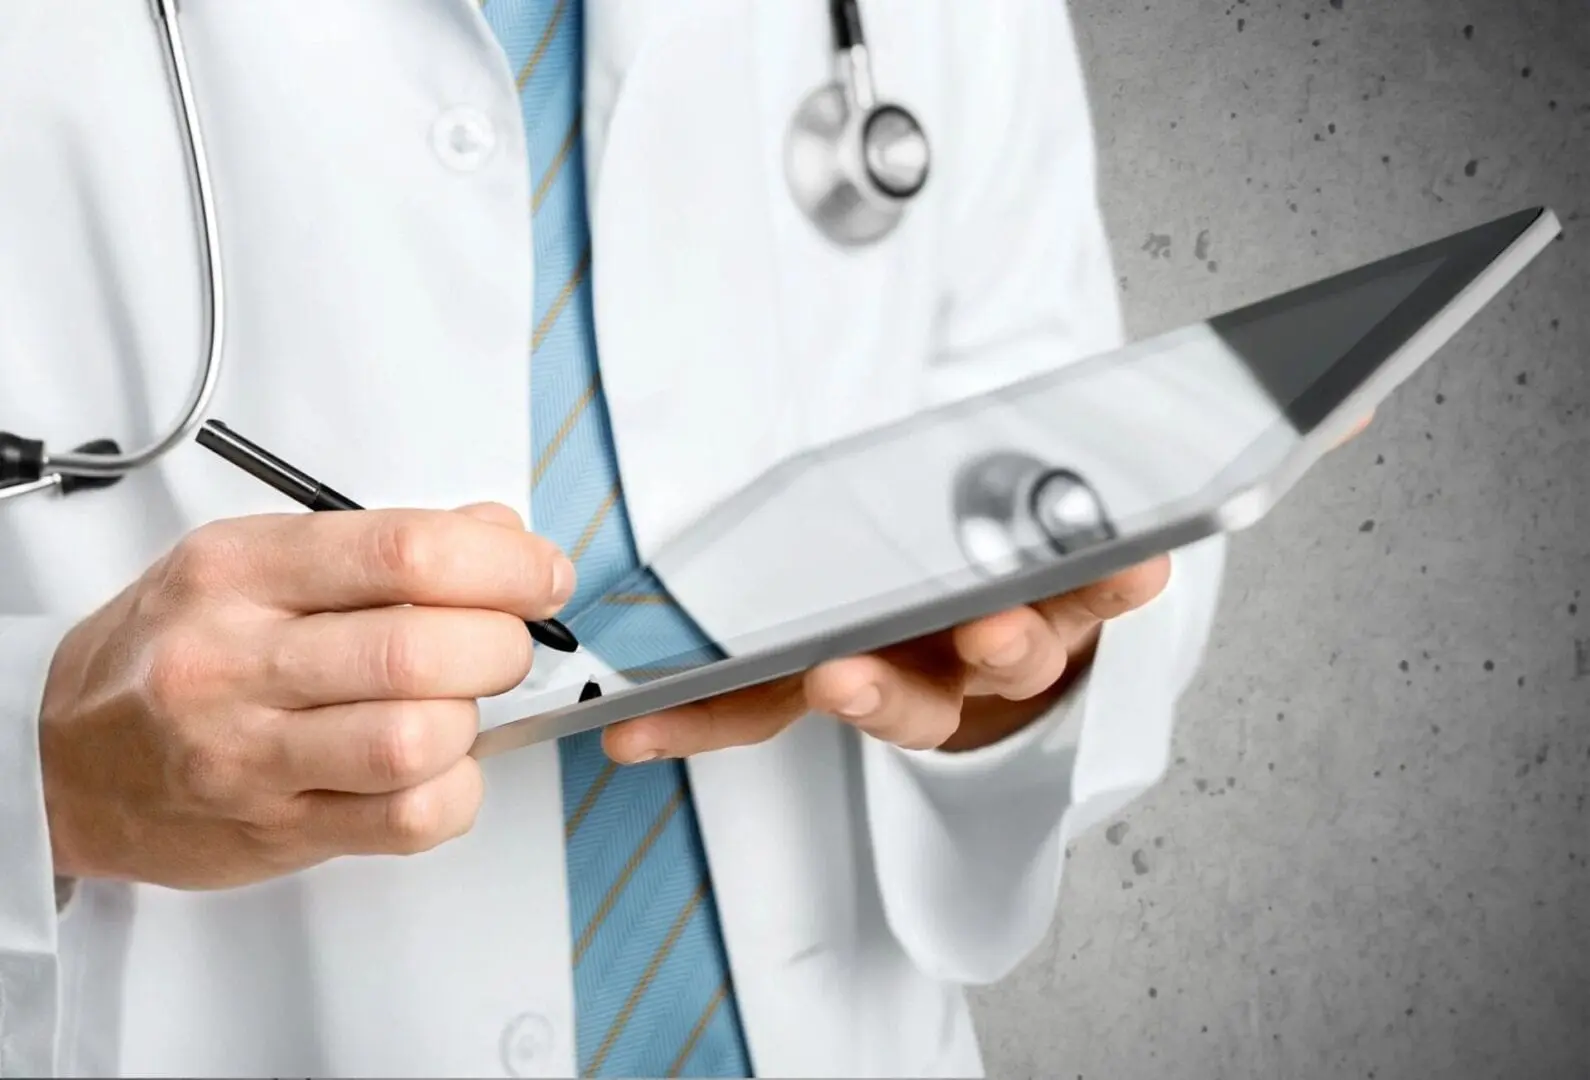 Doctor wearing a lab coat tapping on a tablet with a stylus